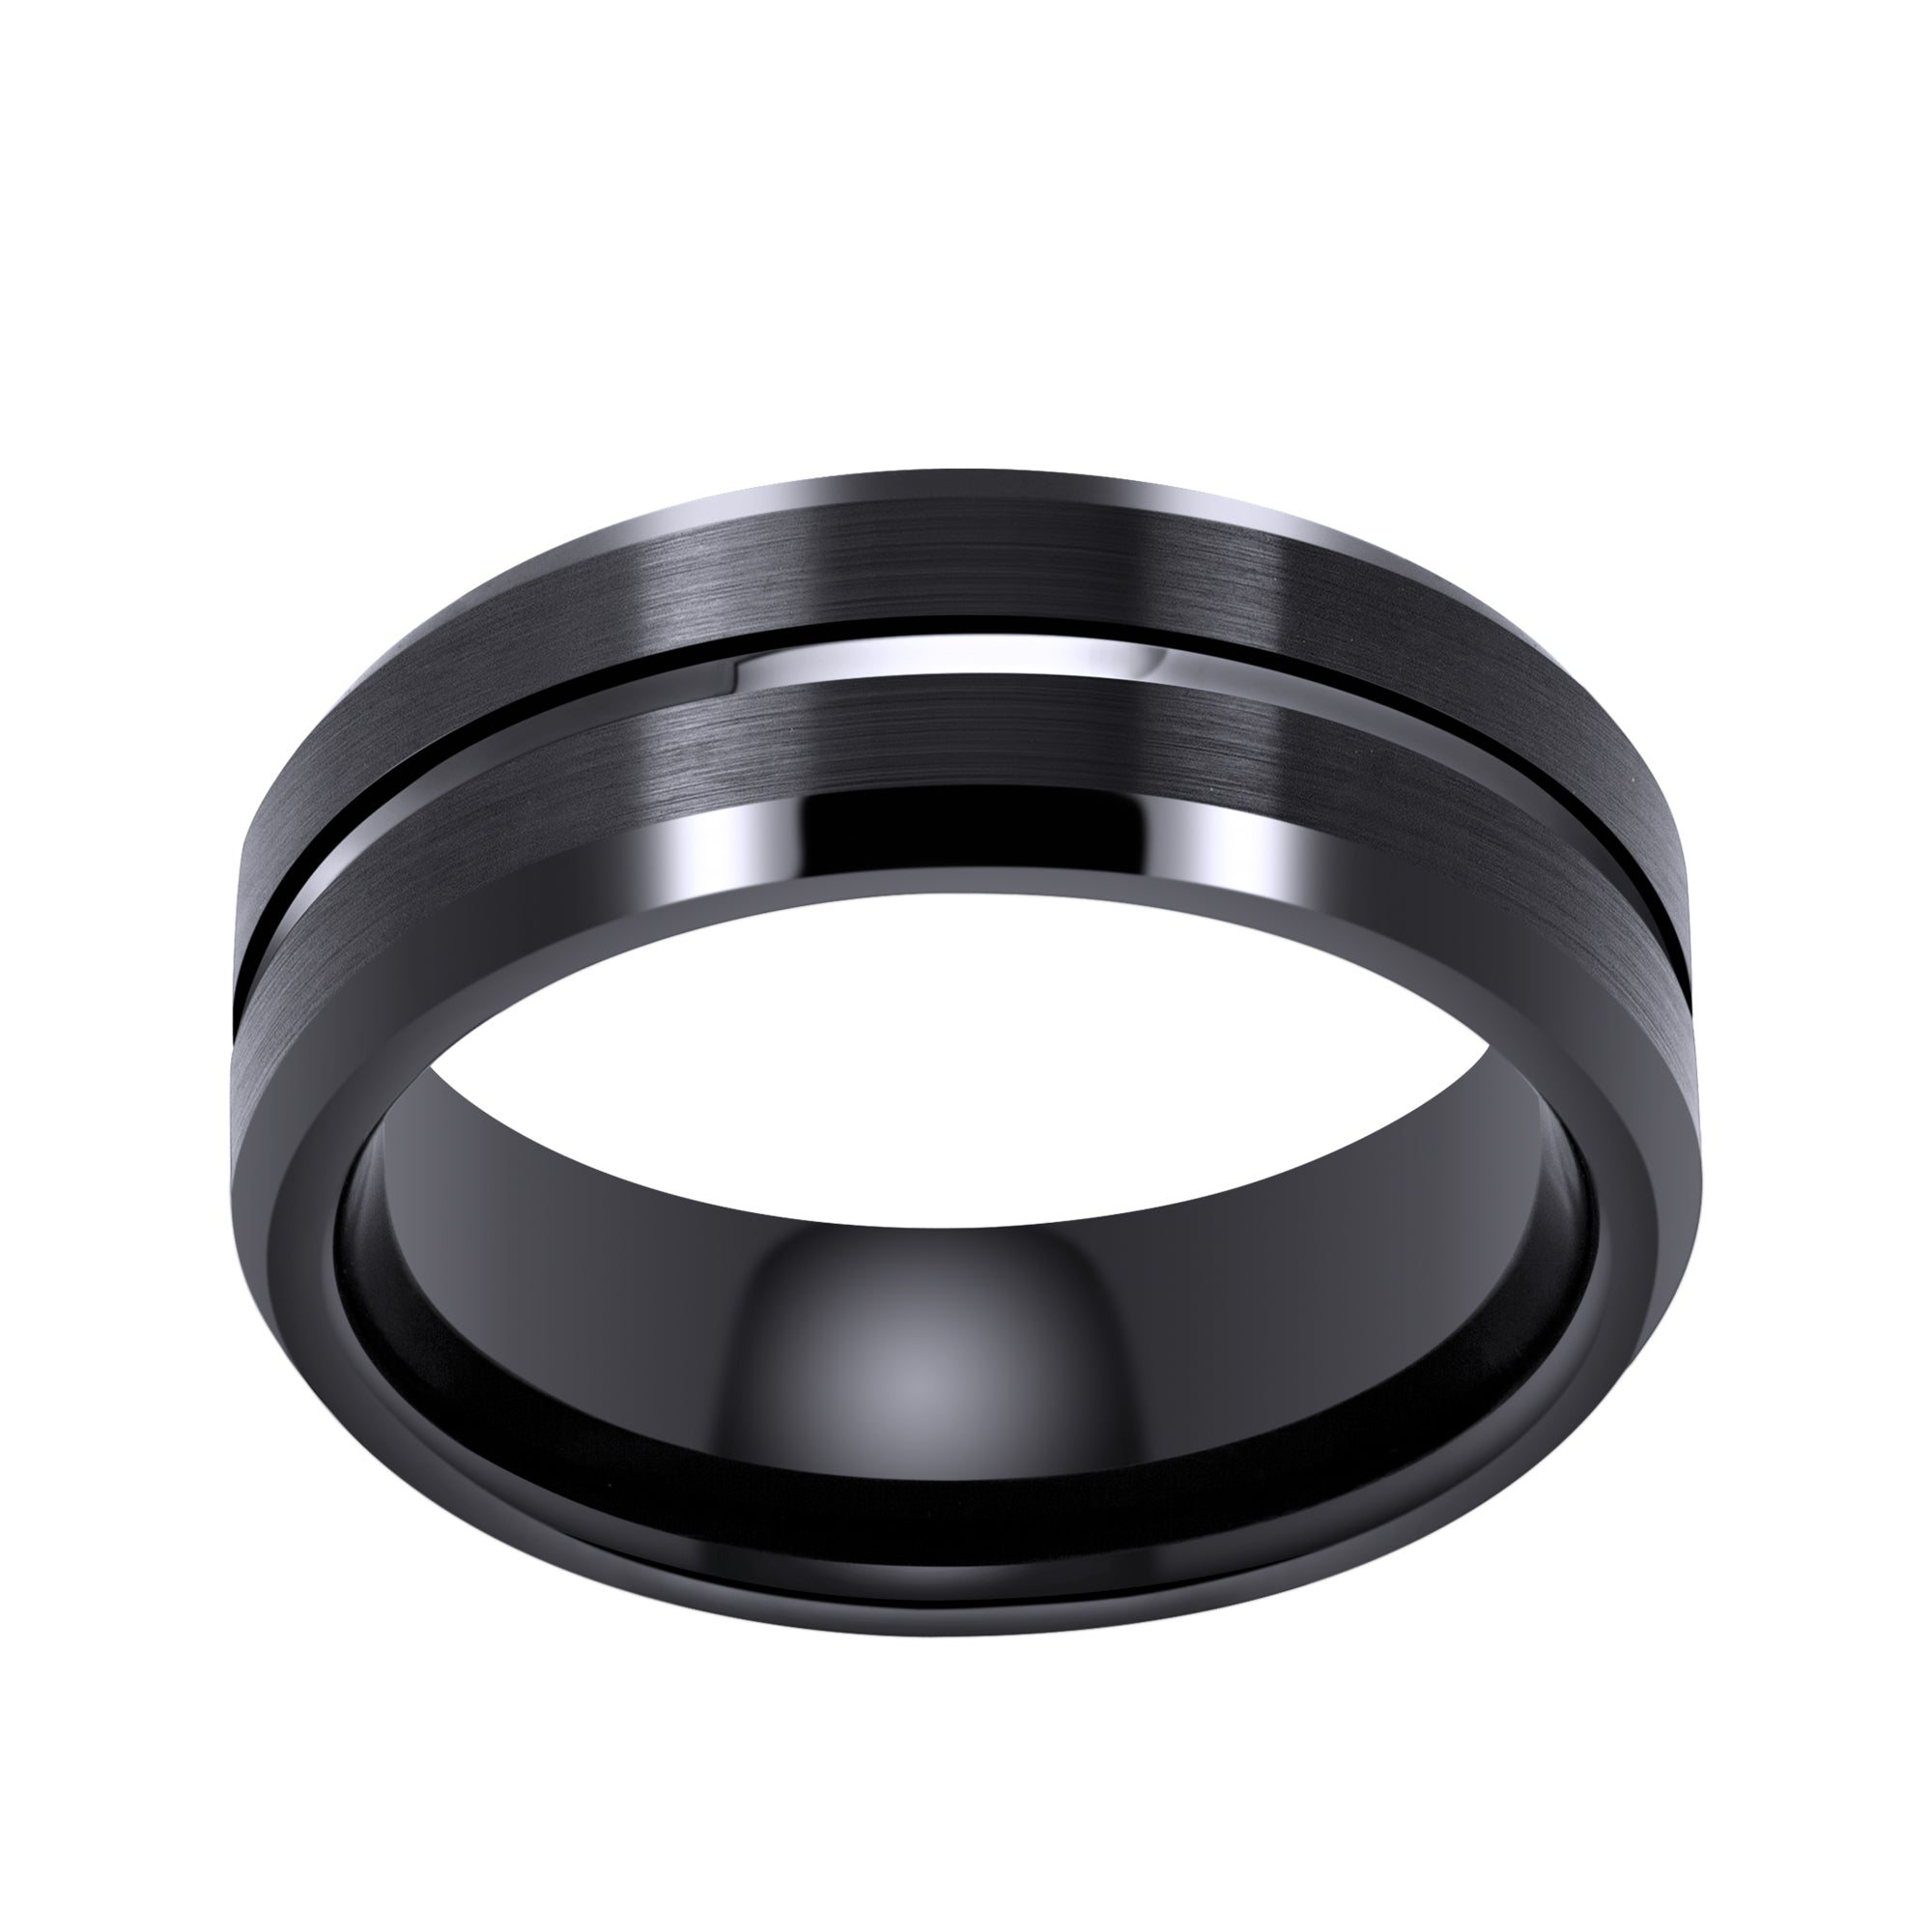 Black Tungsten Carbide Ring with Groove, Polished Beveled Edge, 8MM